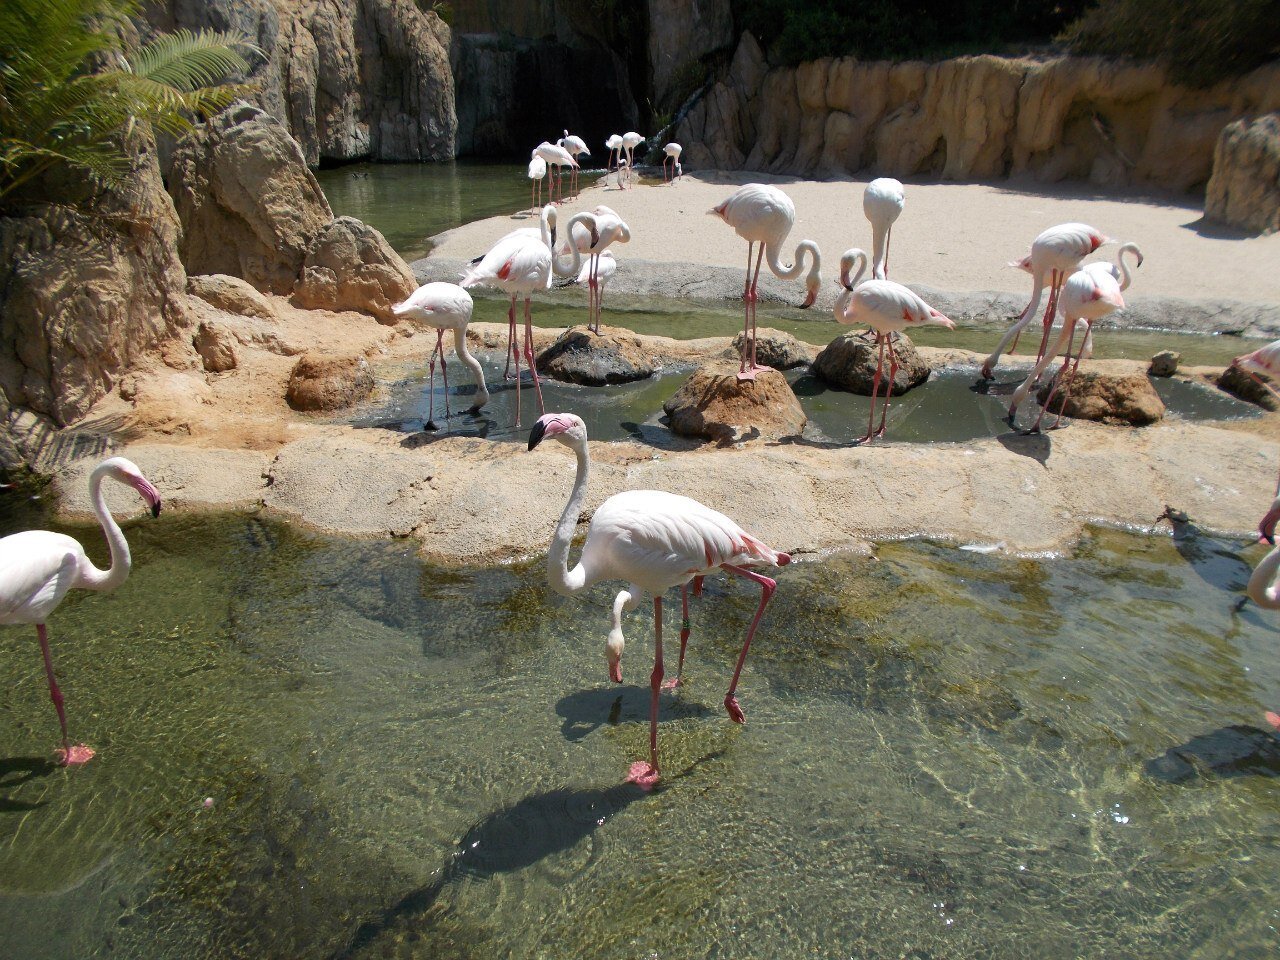 Pink flamingos occupy a large area, with only large fish living with them